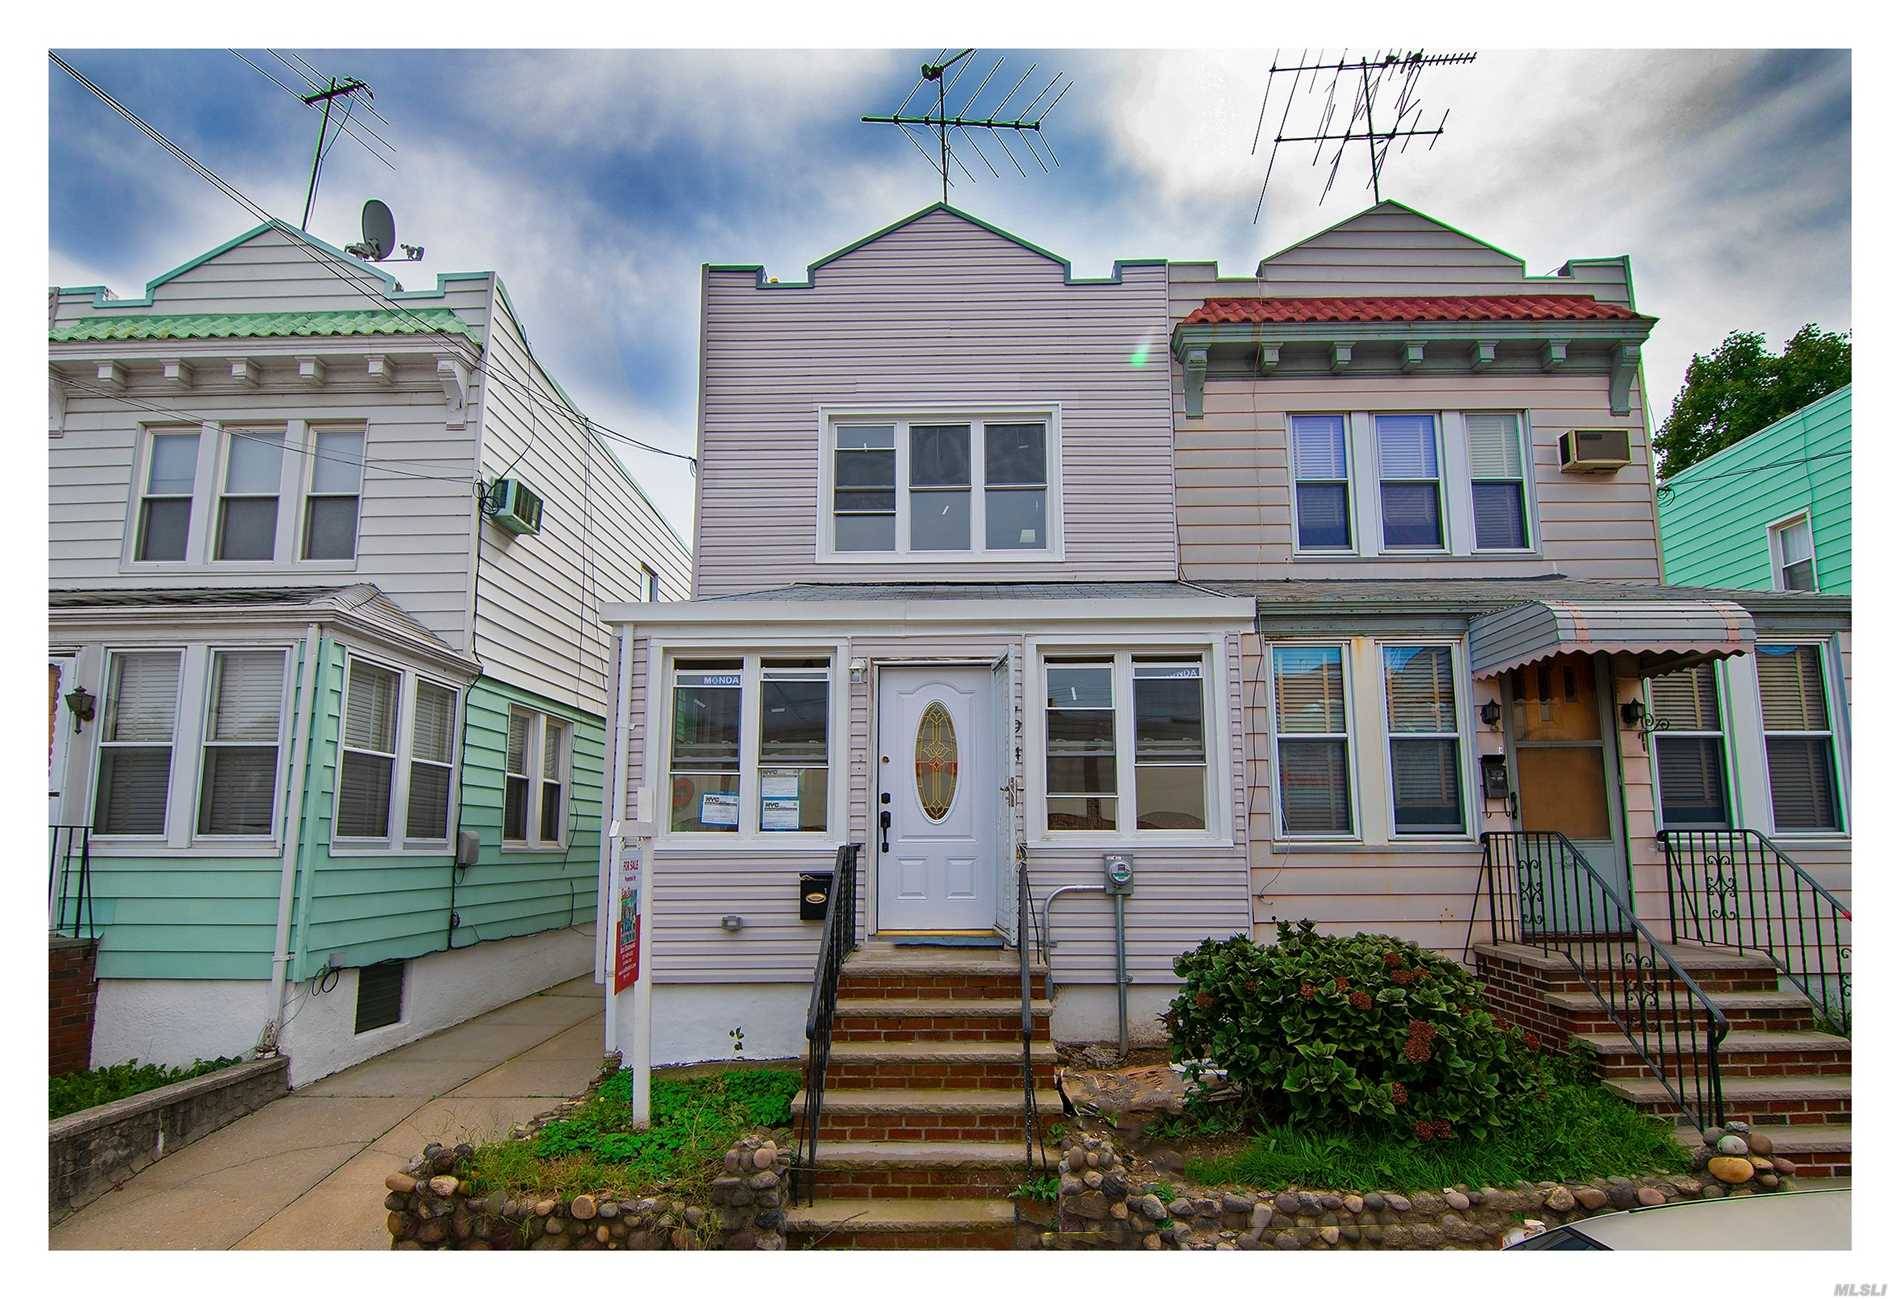 We Are Happy To Present This Beautiful Totally Renovated Single Family Home In Middle Village!